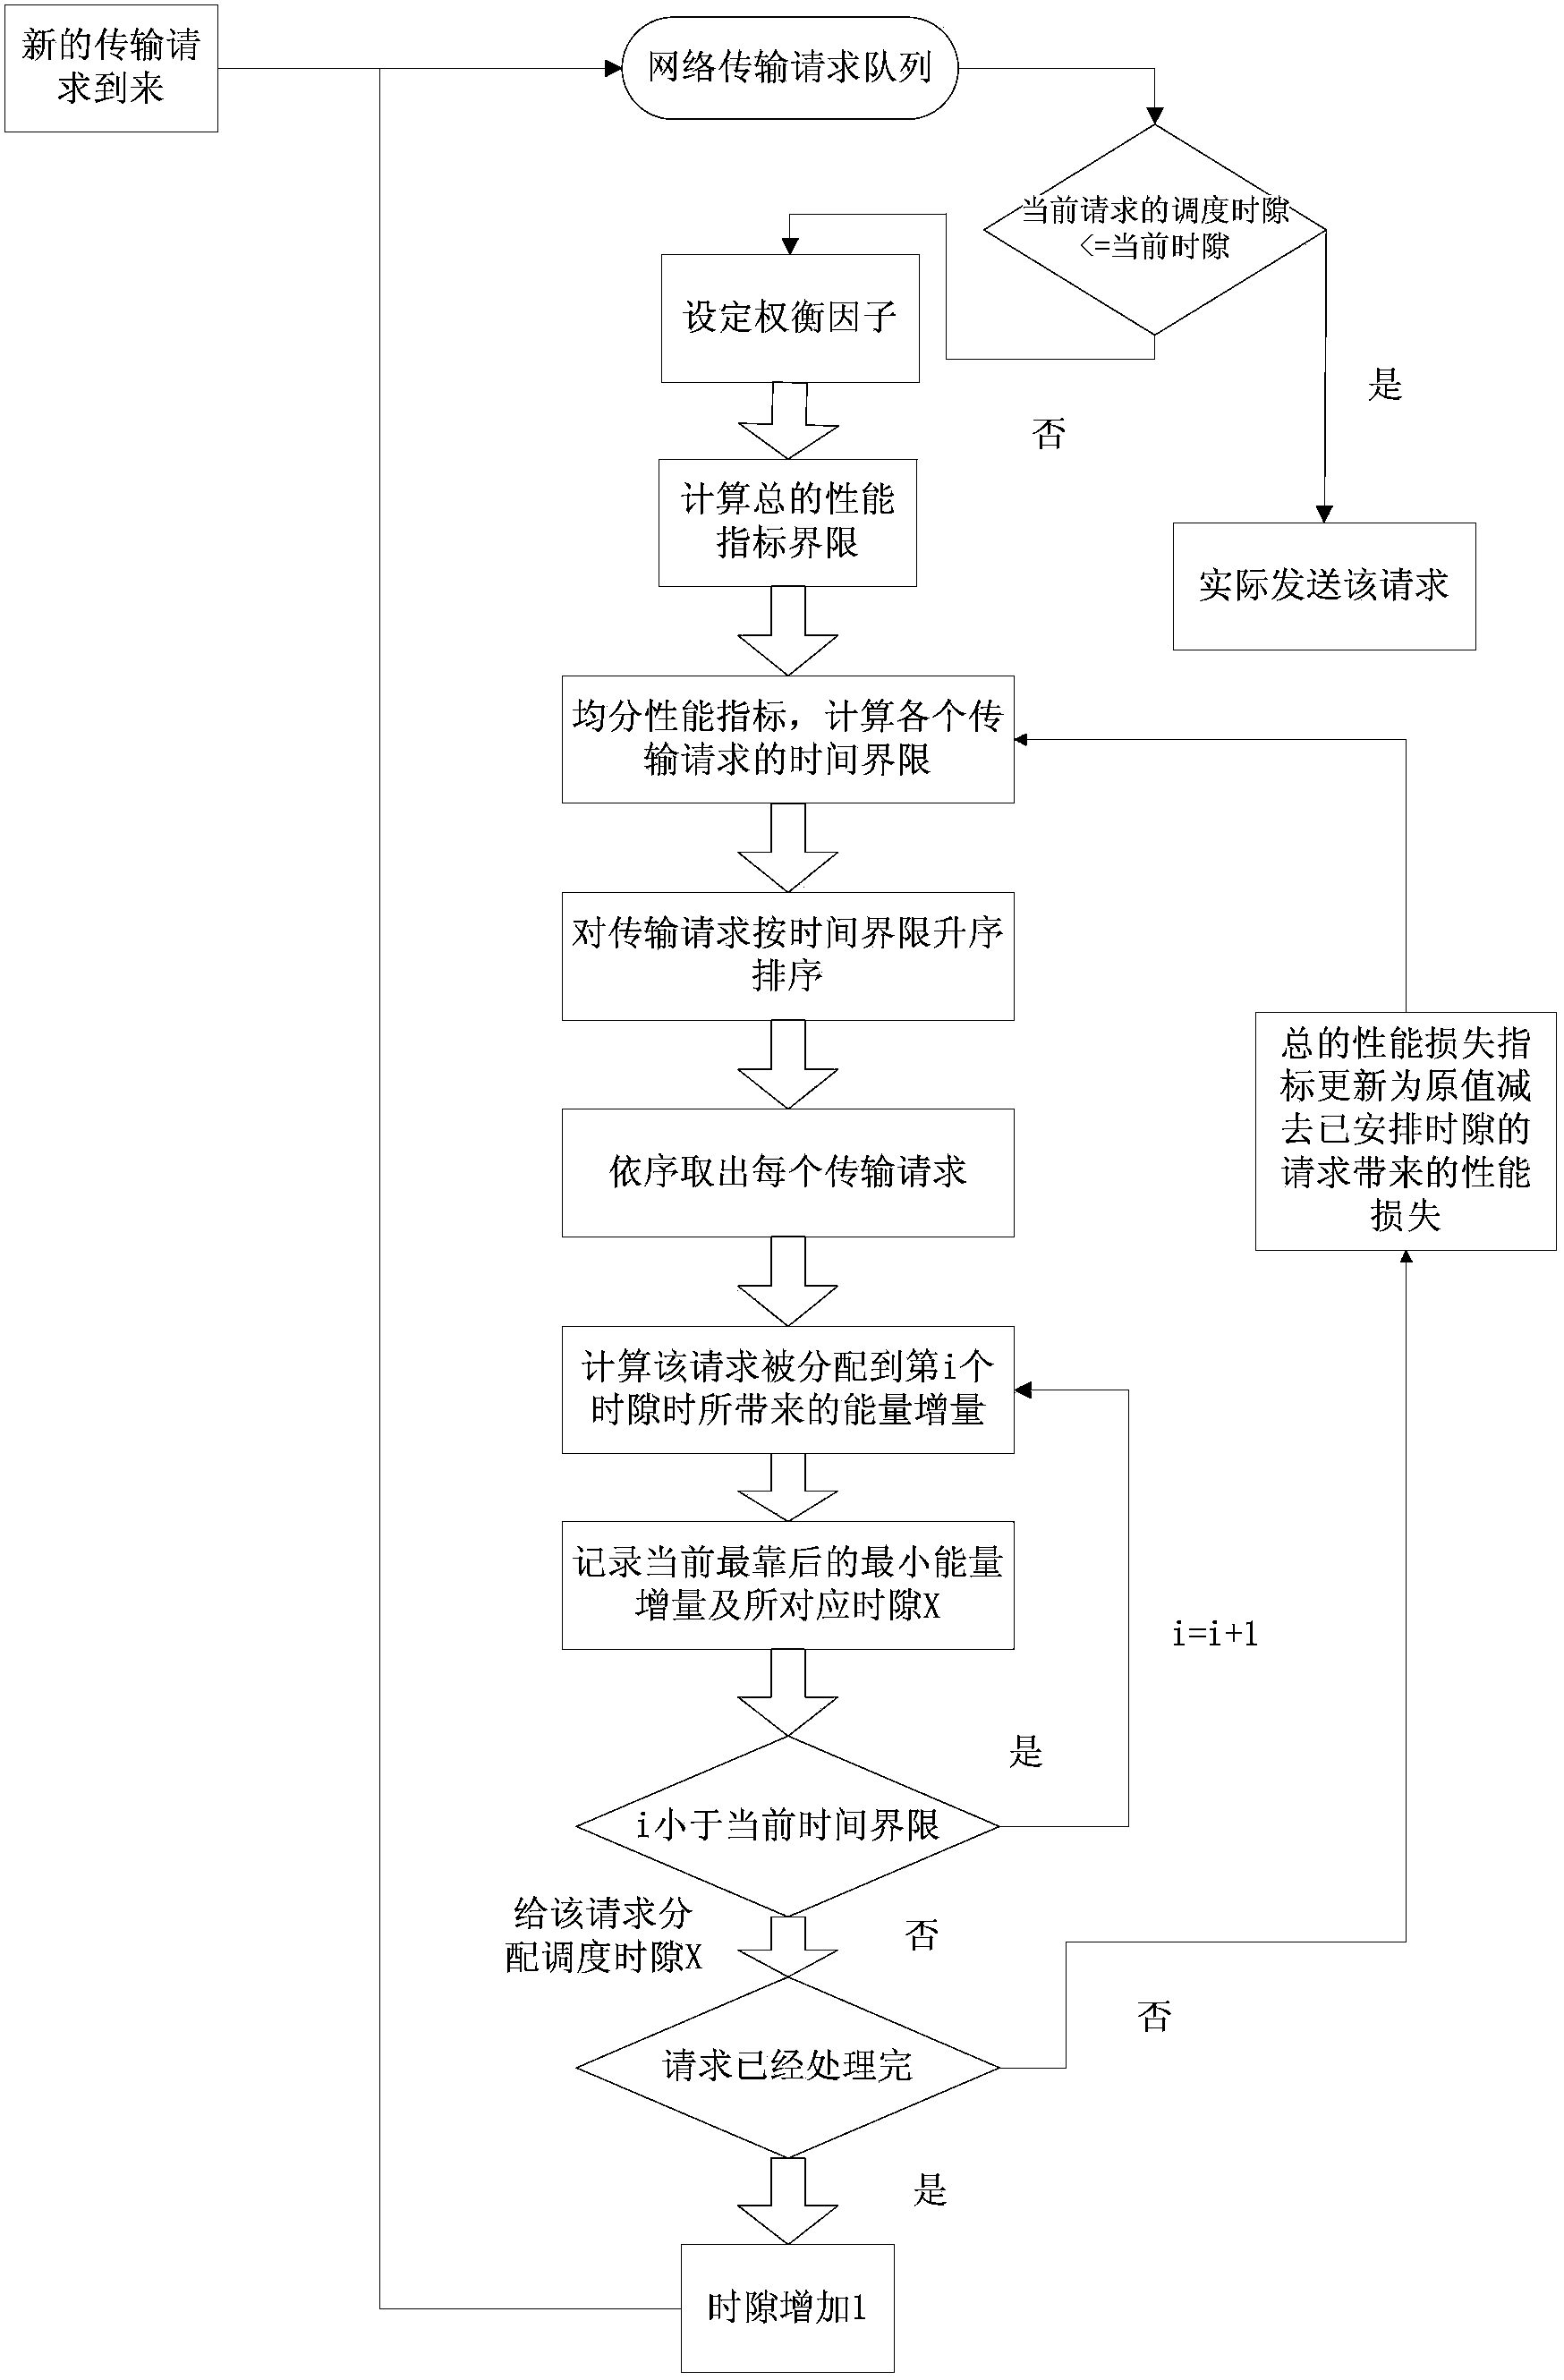 Mobile intelligent terminal third-generation (3G) communication energy consumption and user performance experience balancing and scheduling scheme